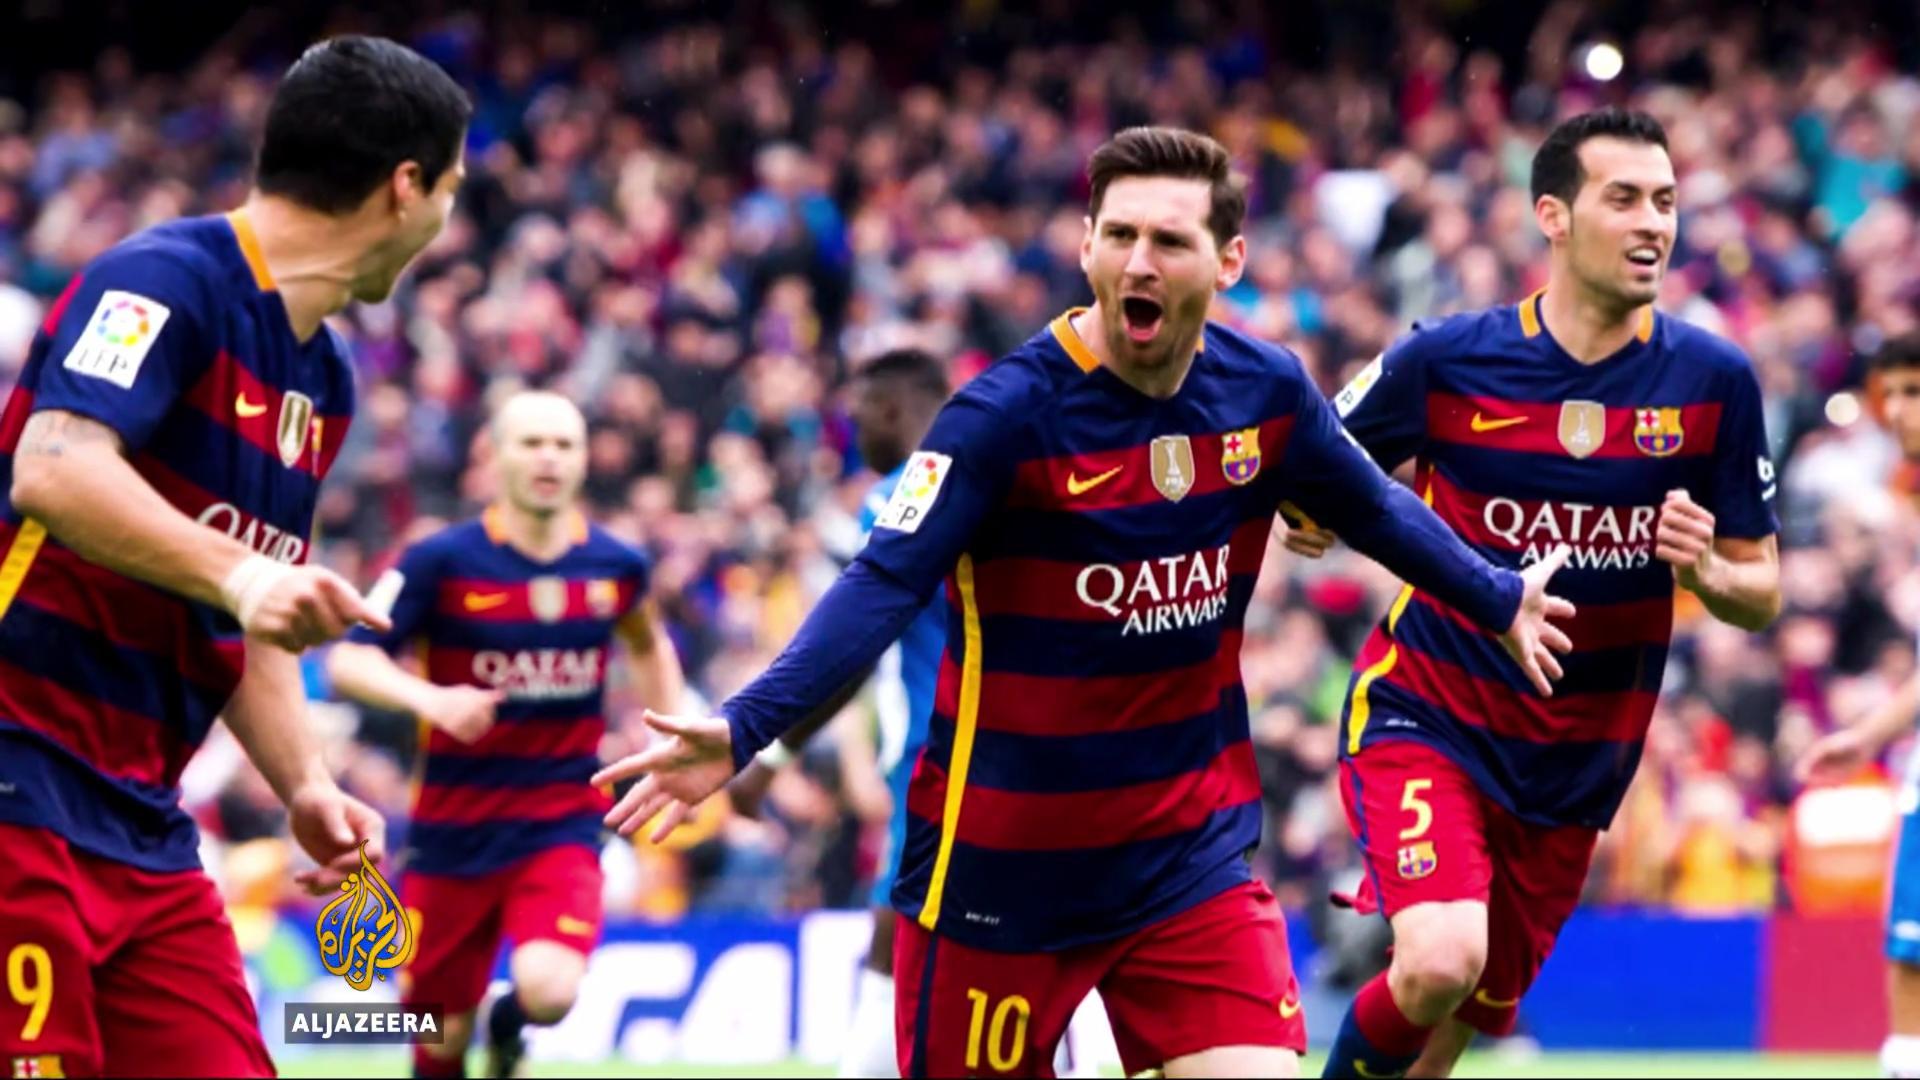 Barcelona Players In Action Wallpaper: Players, Teams, Leagues